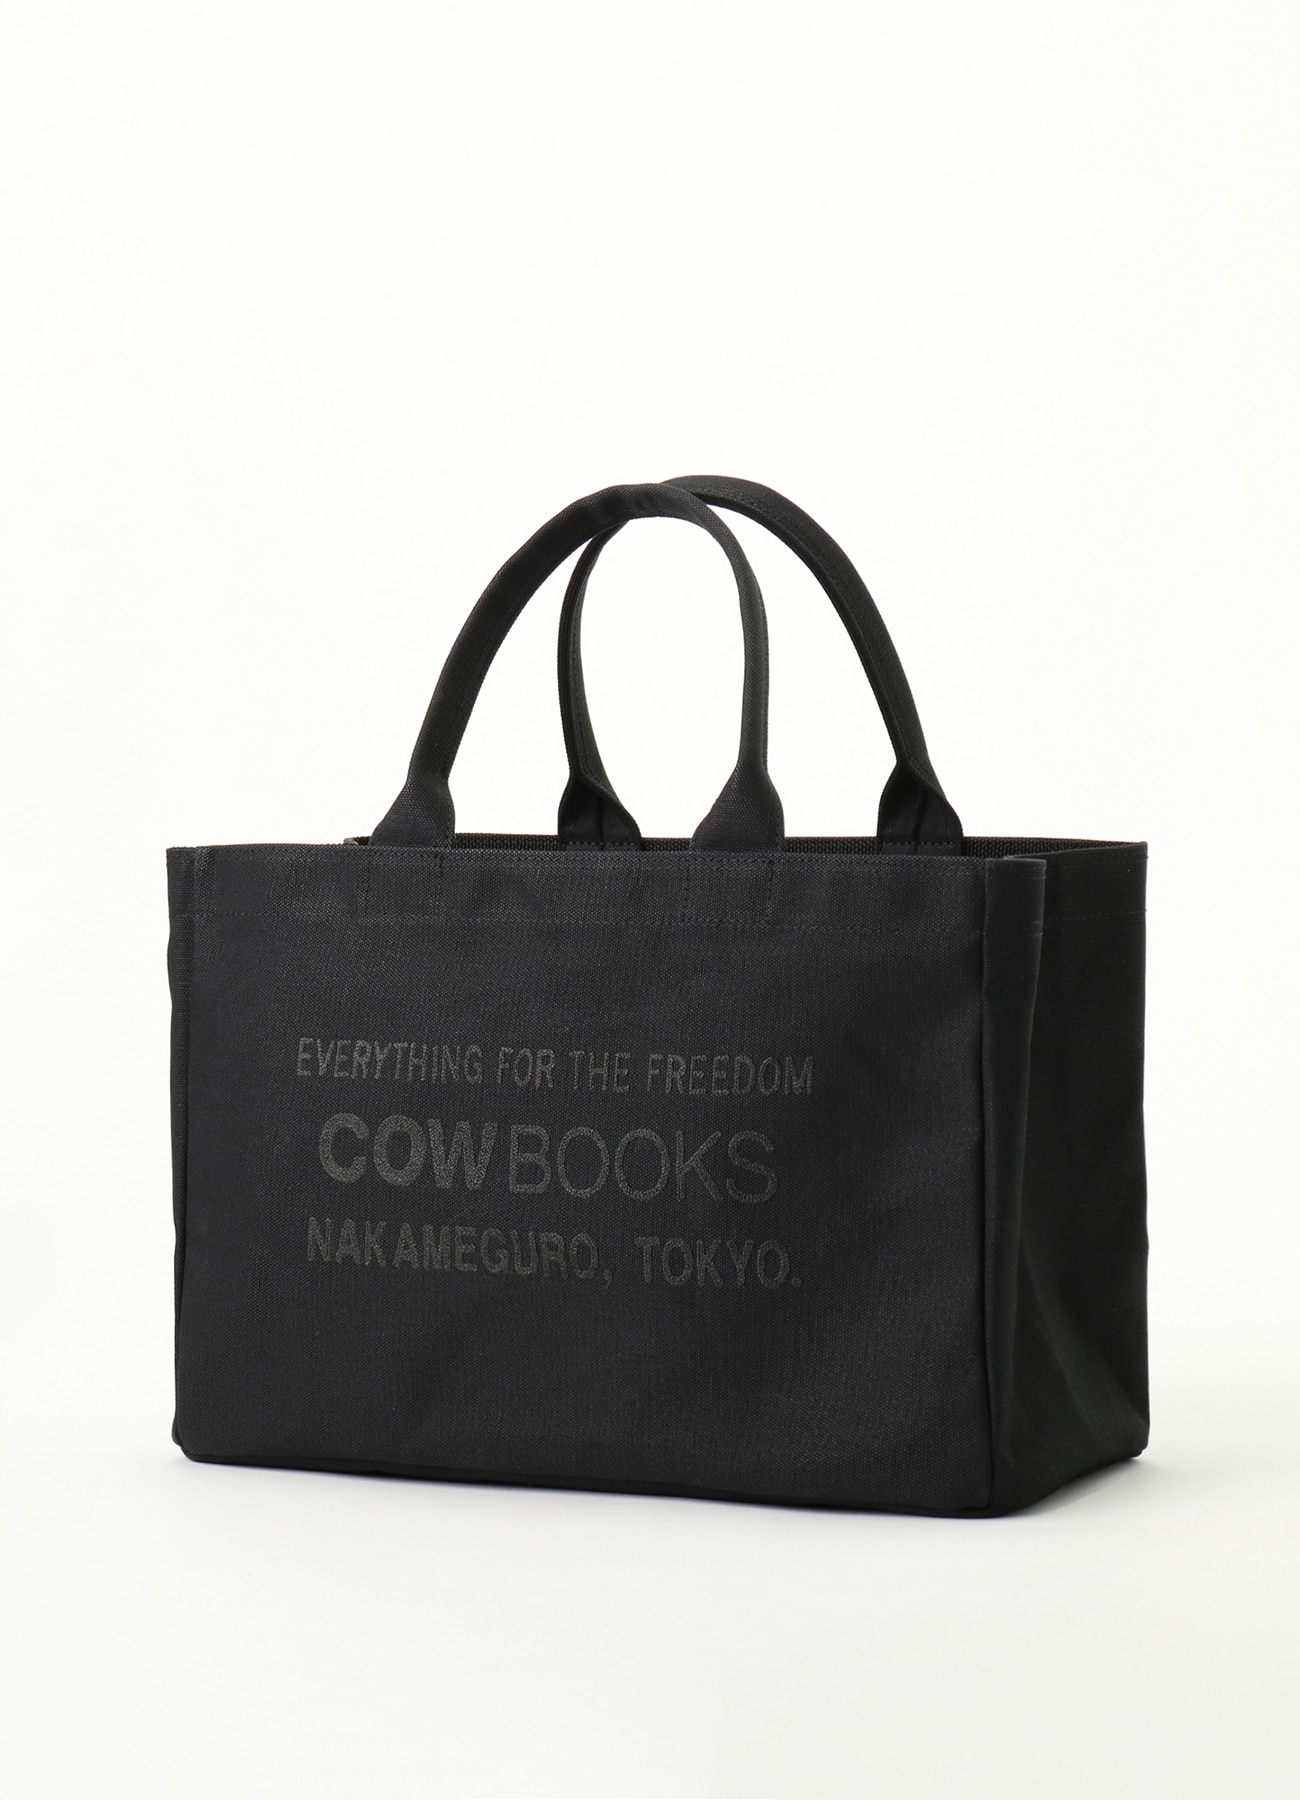 WILDSIDE × COW BOOKS Container Tote Small